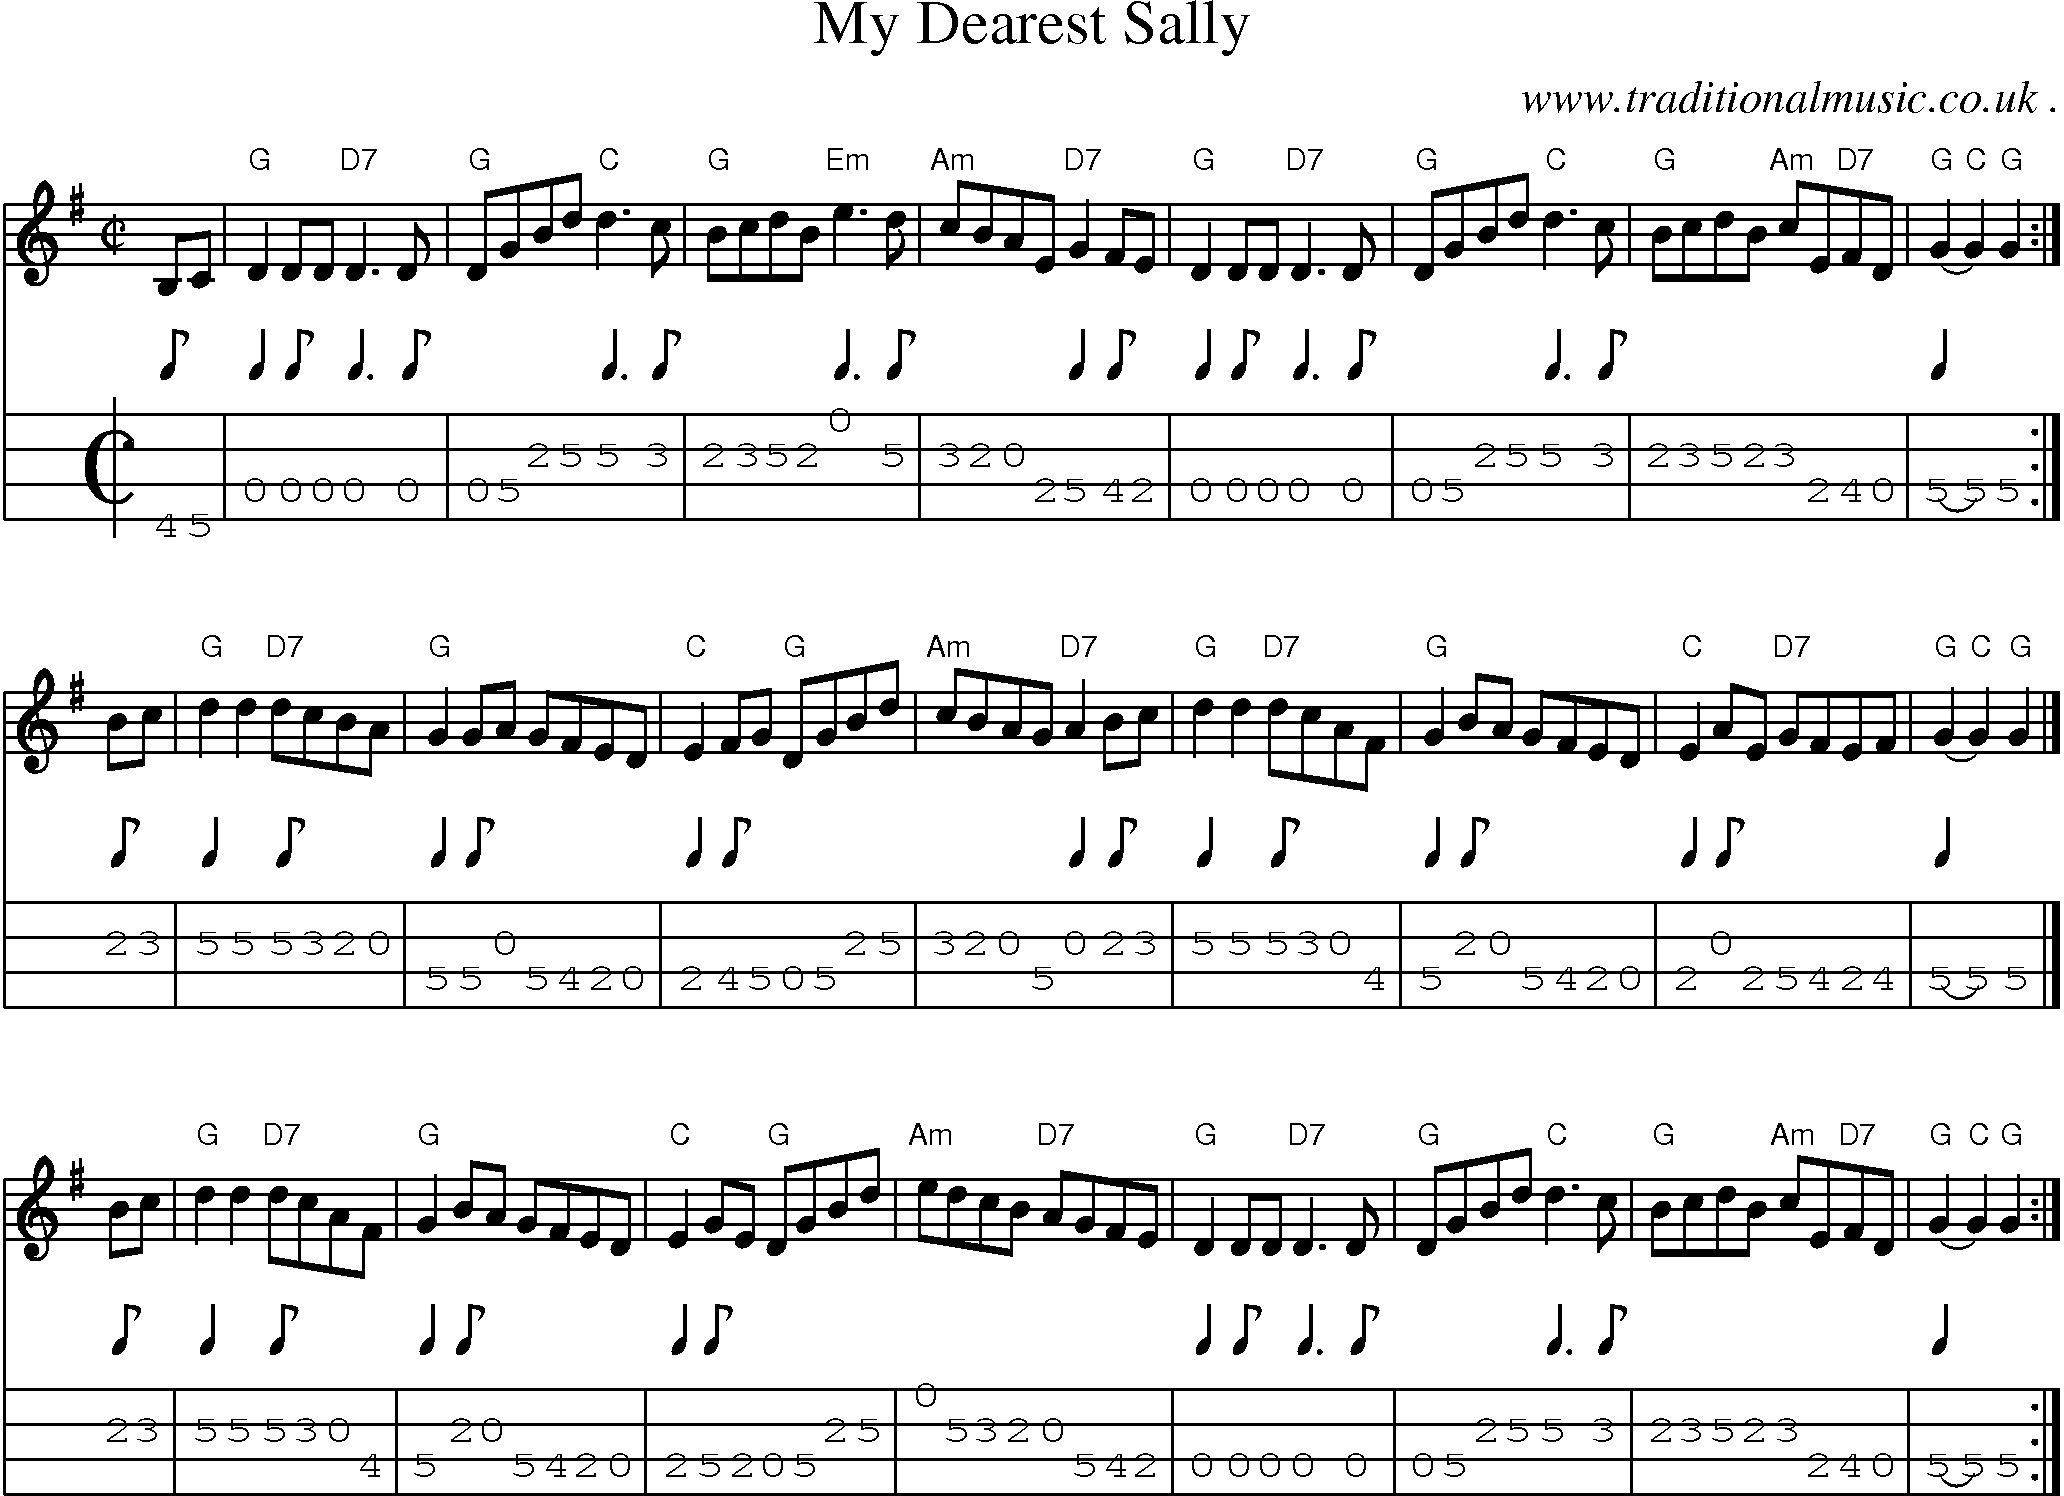 Sheet-music  score, Chords and Mandolin Tabs for My Dearest Sally